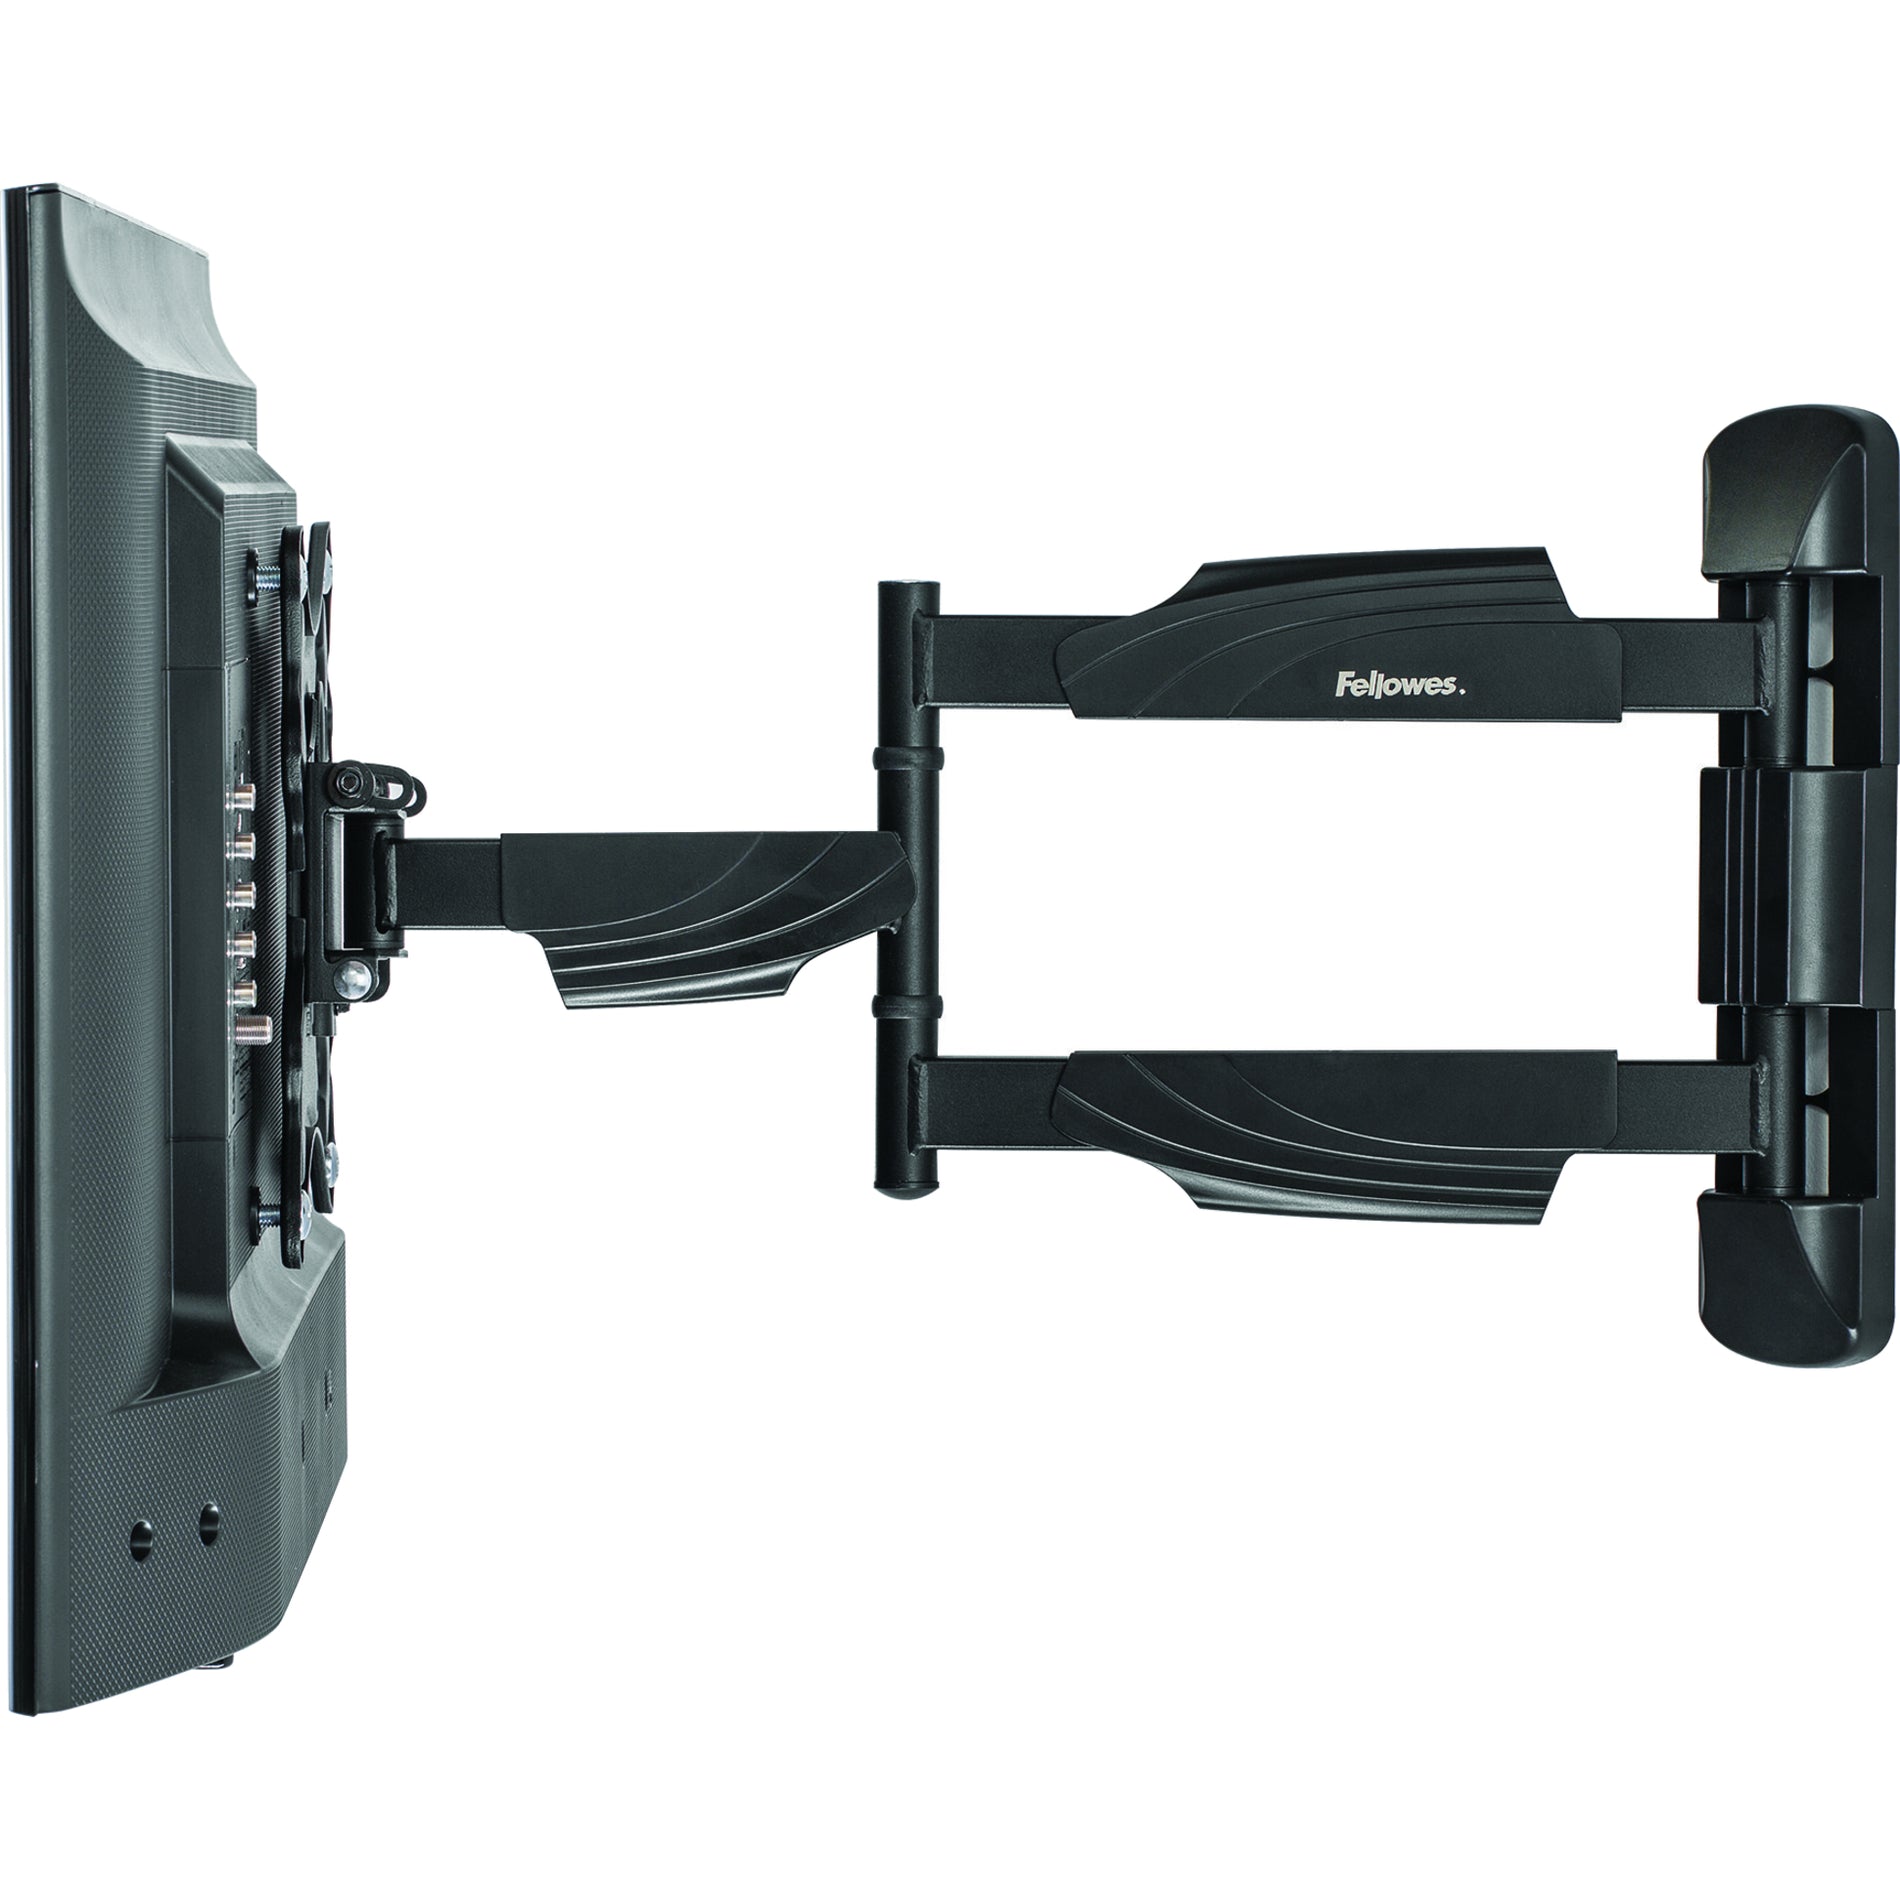 Fellowes 8043601 Full Motion TV Wall Mount, Supports up to 55" Screens, 77 lb Load Capacity